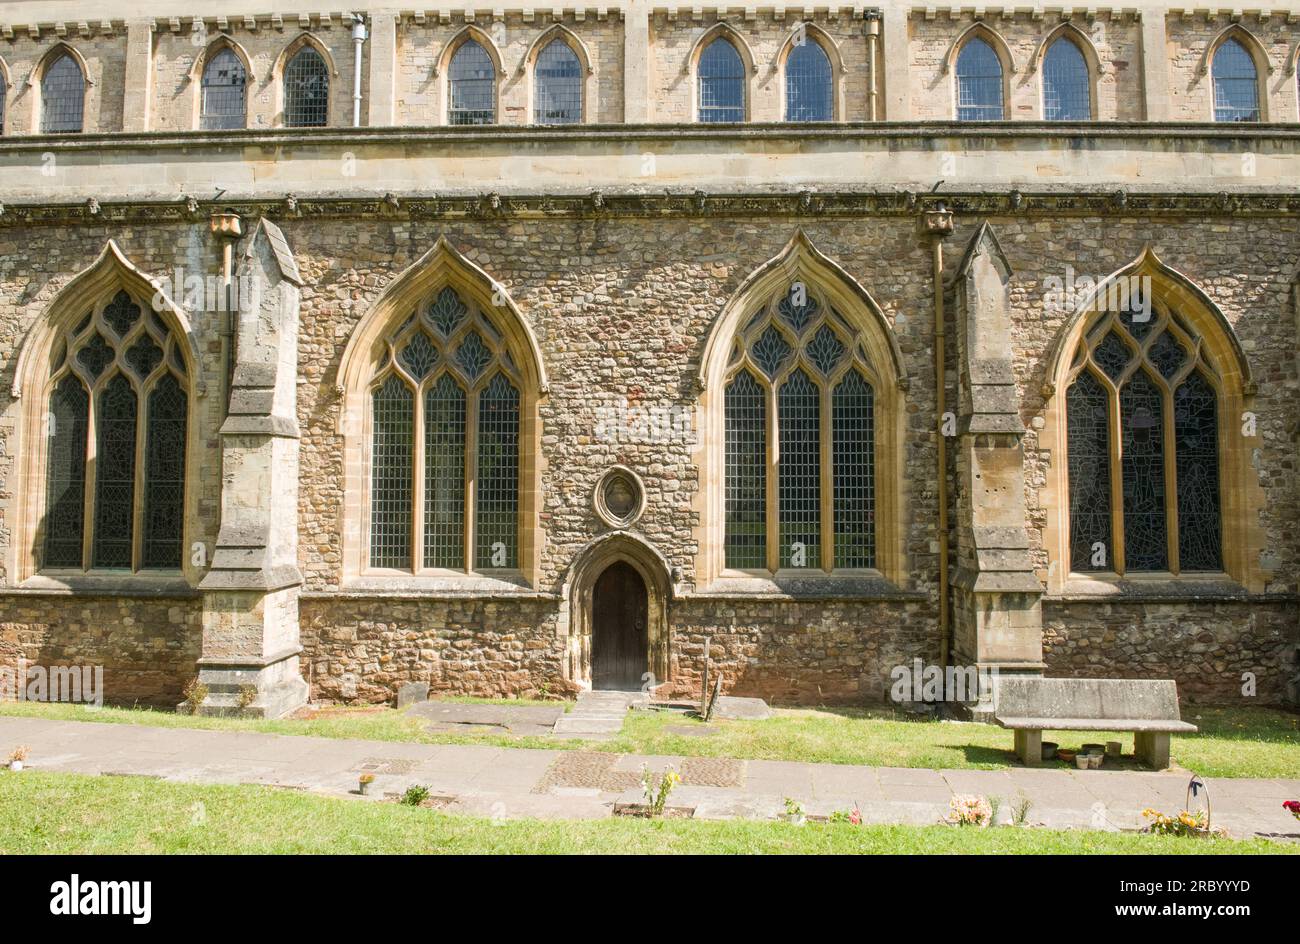 Part of Llandaff Cathedral facing south showing two layers of windows, a small 'side door' and a bench - all enjoying the sun. Stock Photo